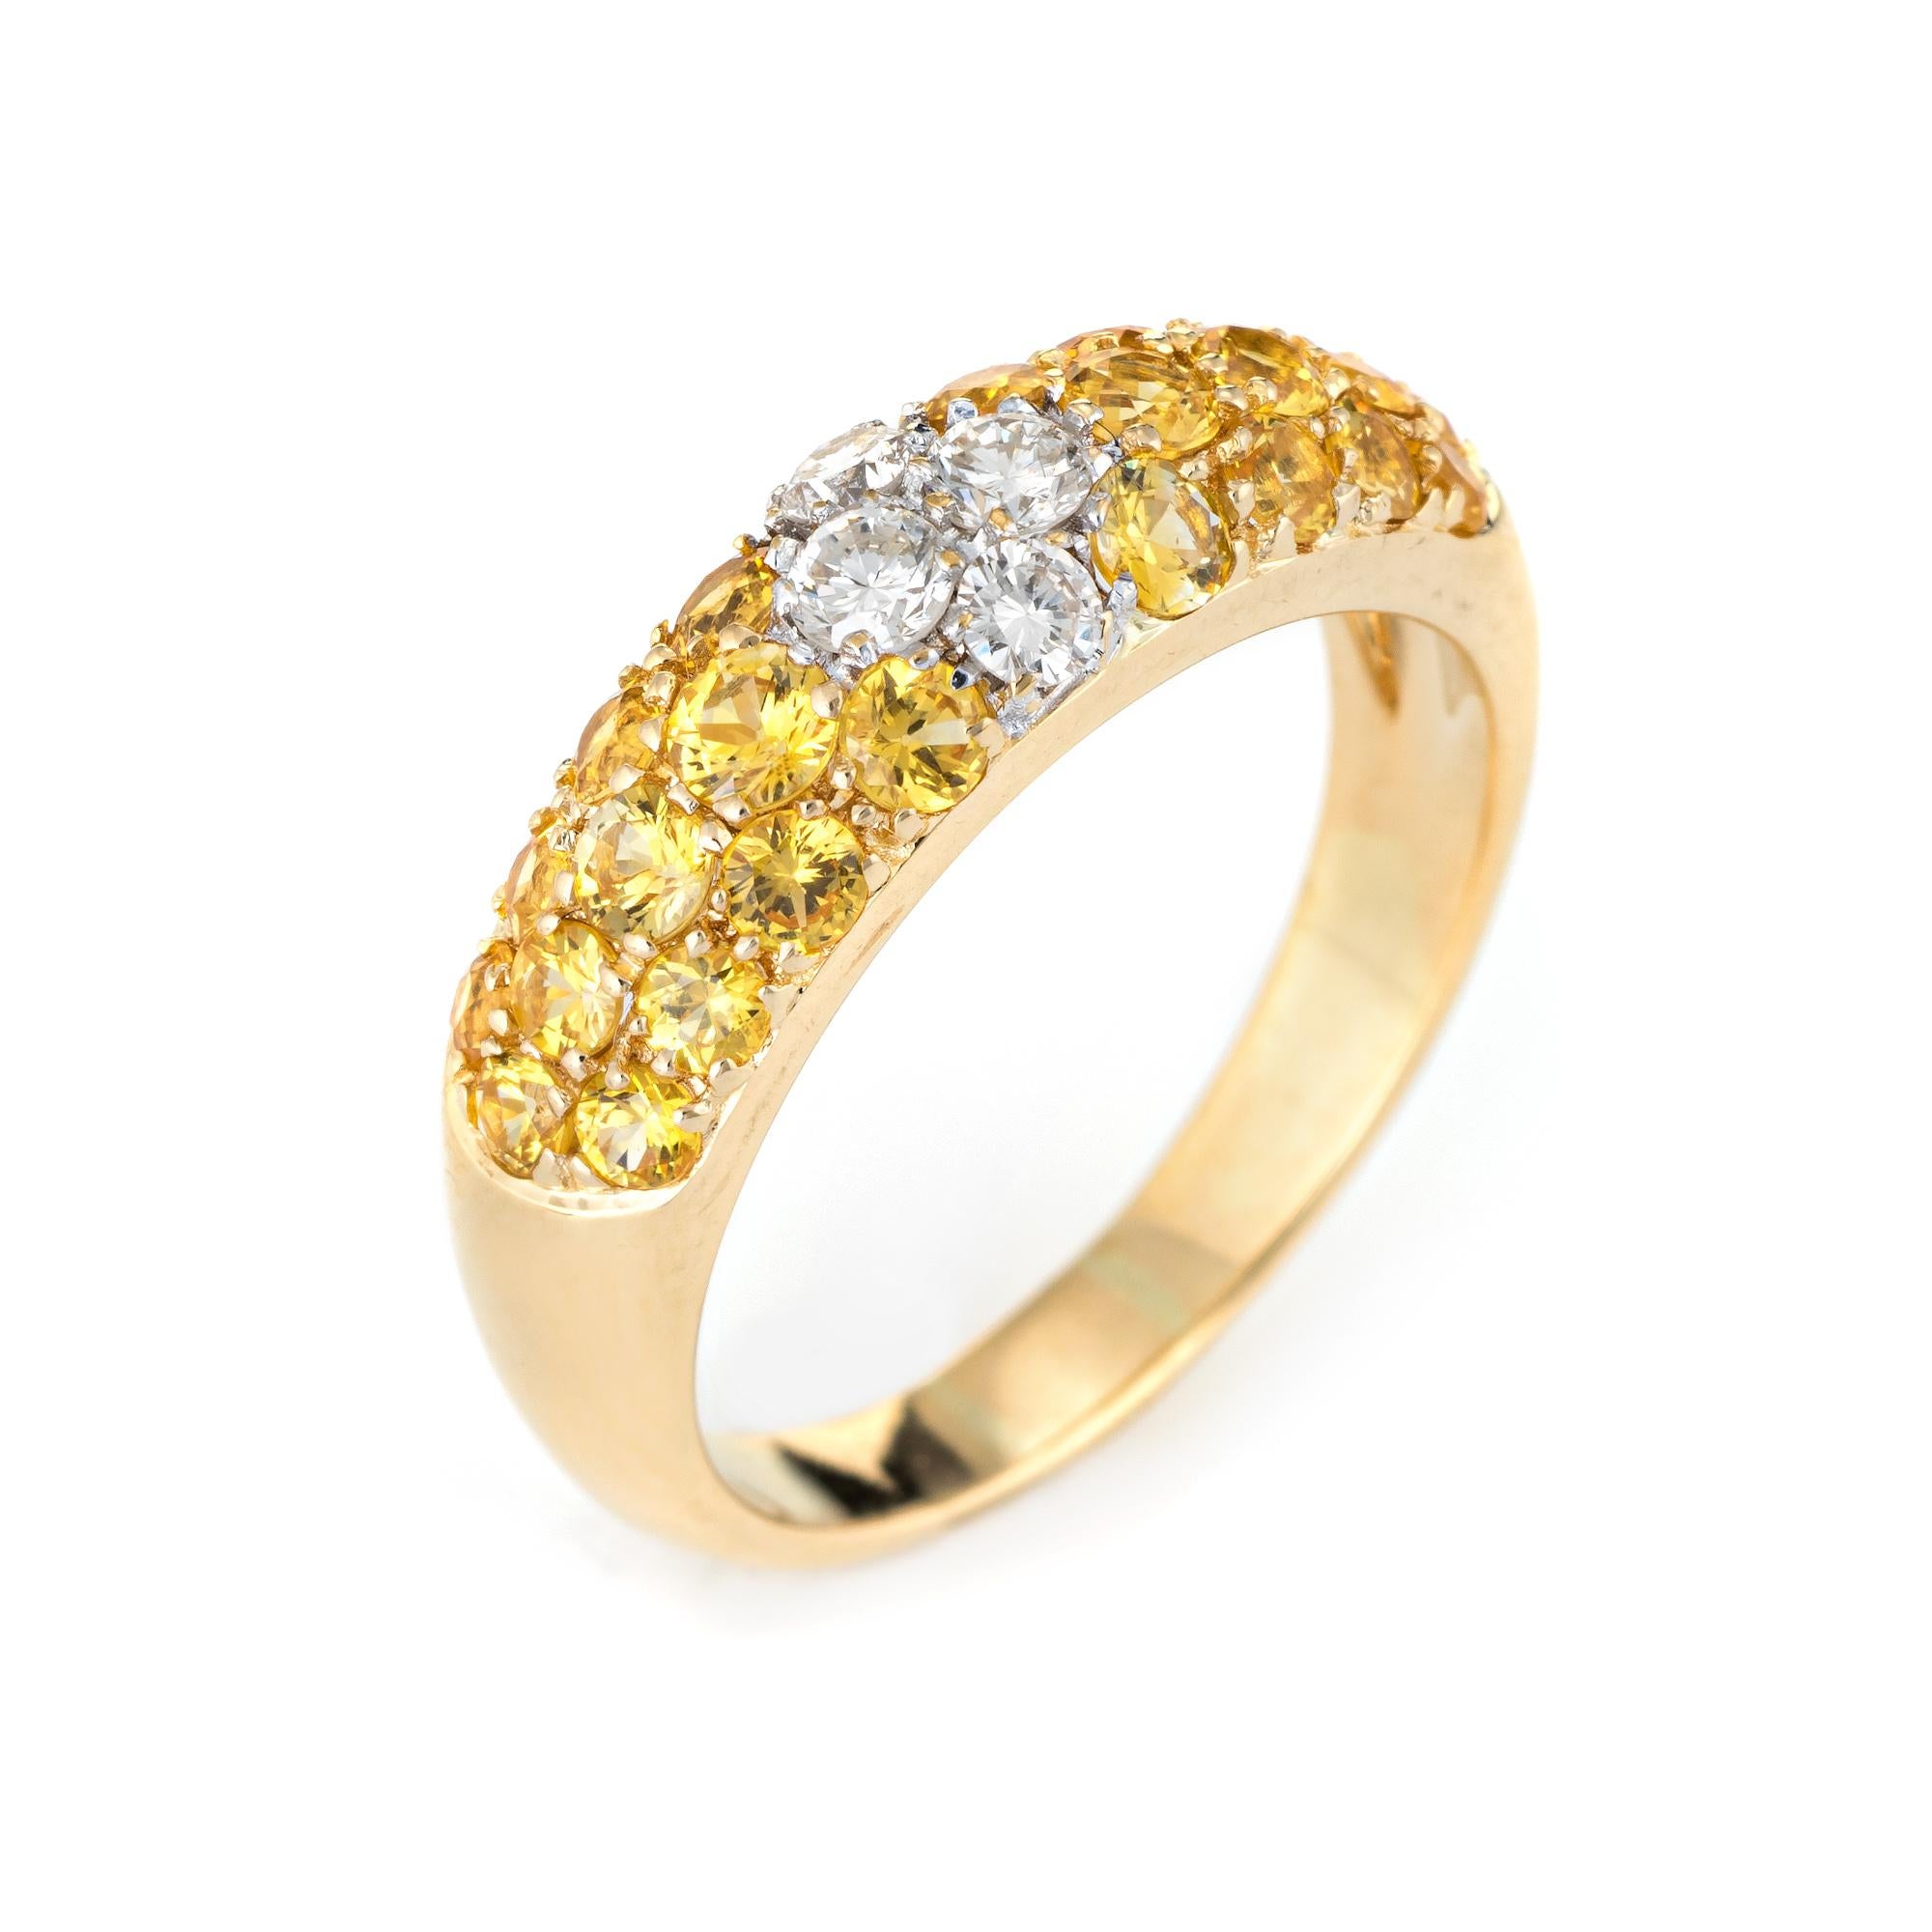 Stylish yellow sapphire & diamond band crafted in 18 karat yellow gold. 

Four round brilliant cut diamonds are estimated at 0.10 carats each and total an estimated 0.40 carats. The yellow sapphires total an estimated 2 carats. The sapphires are in